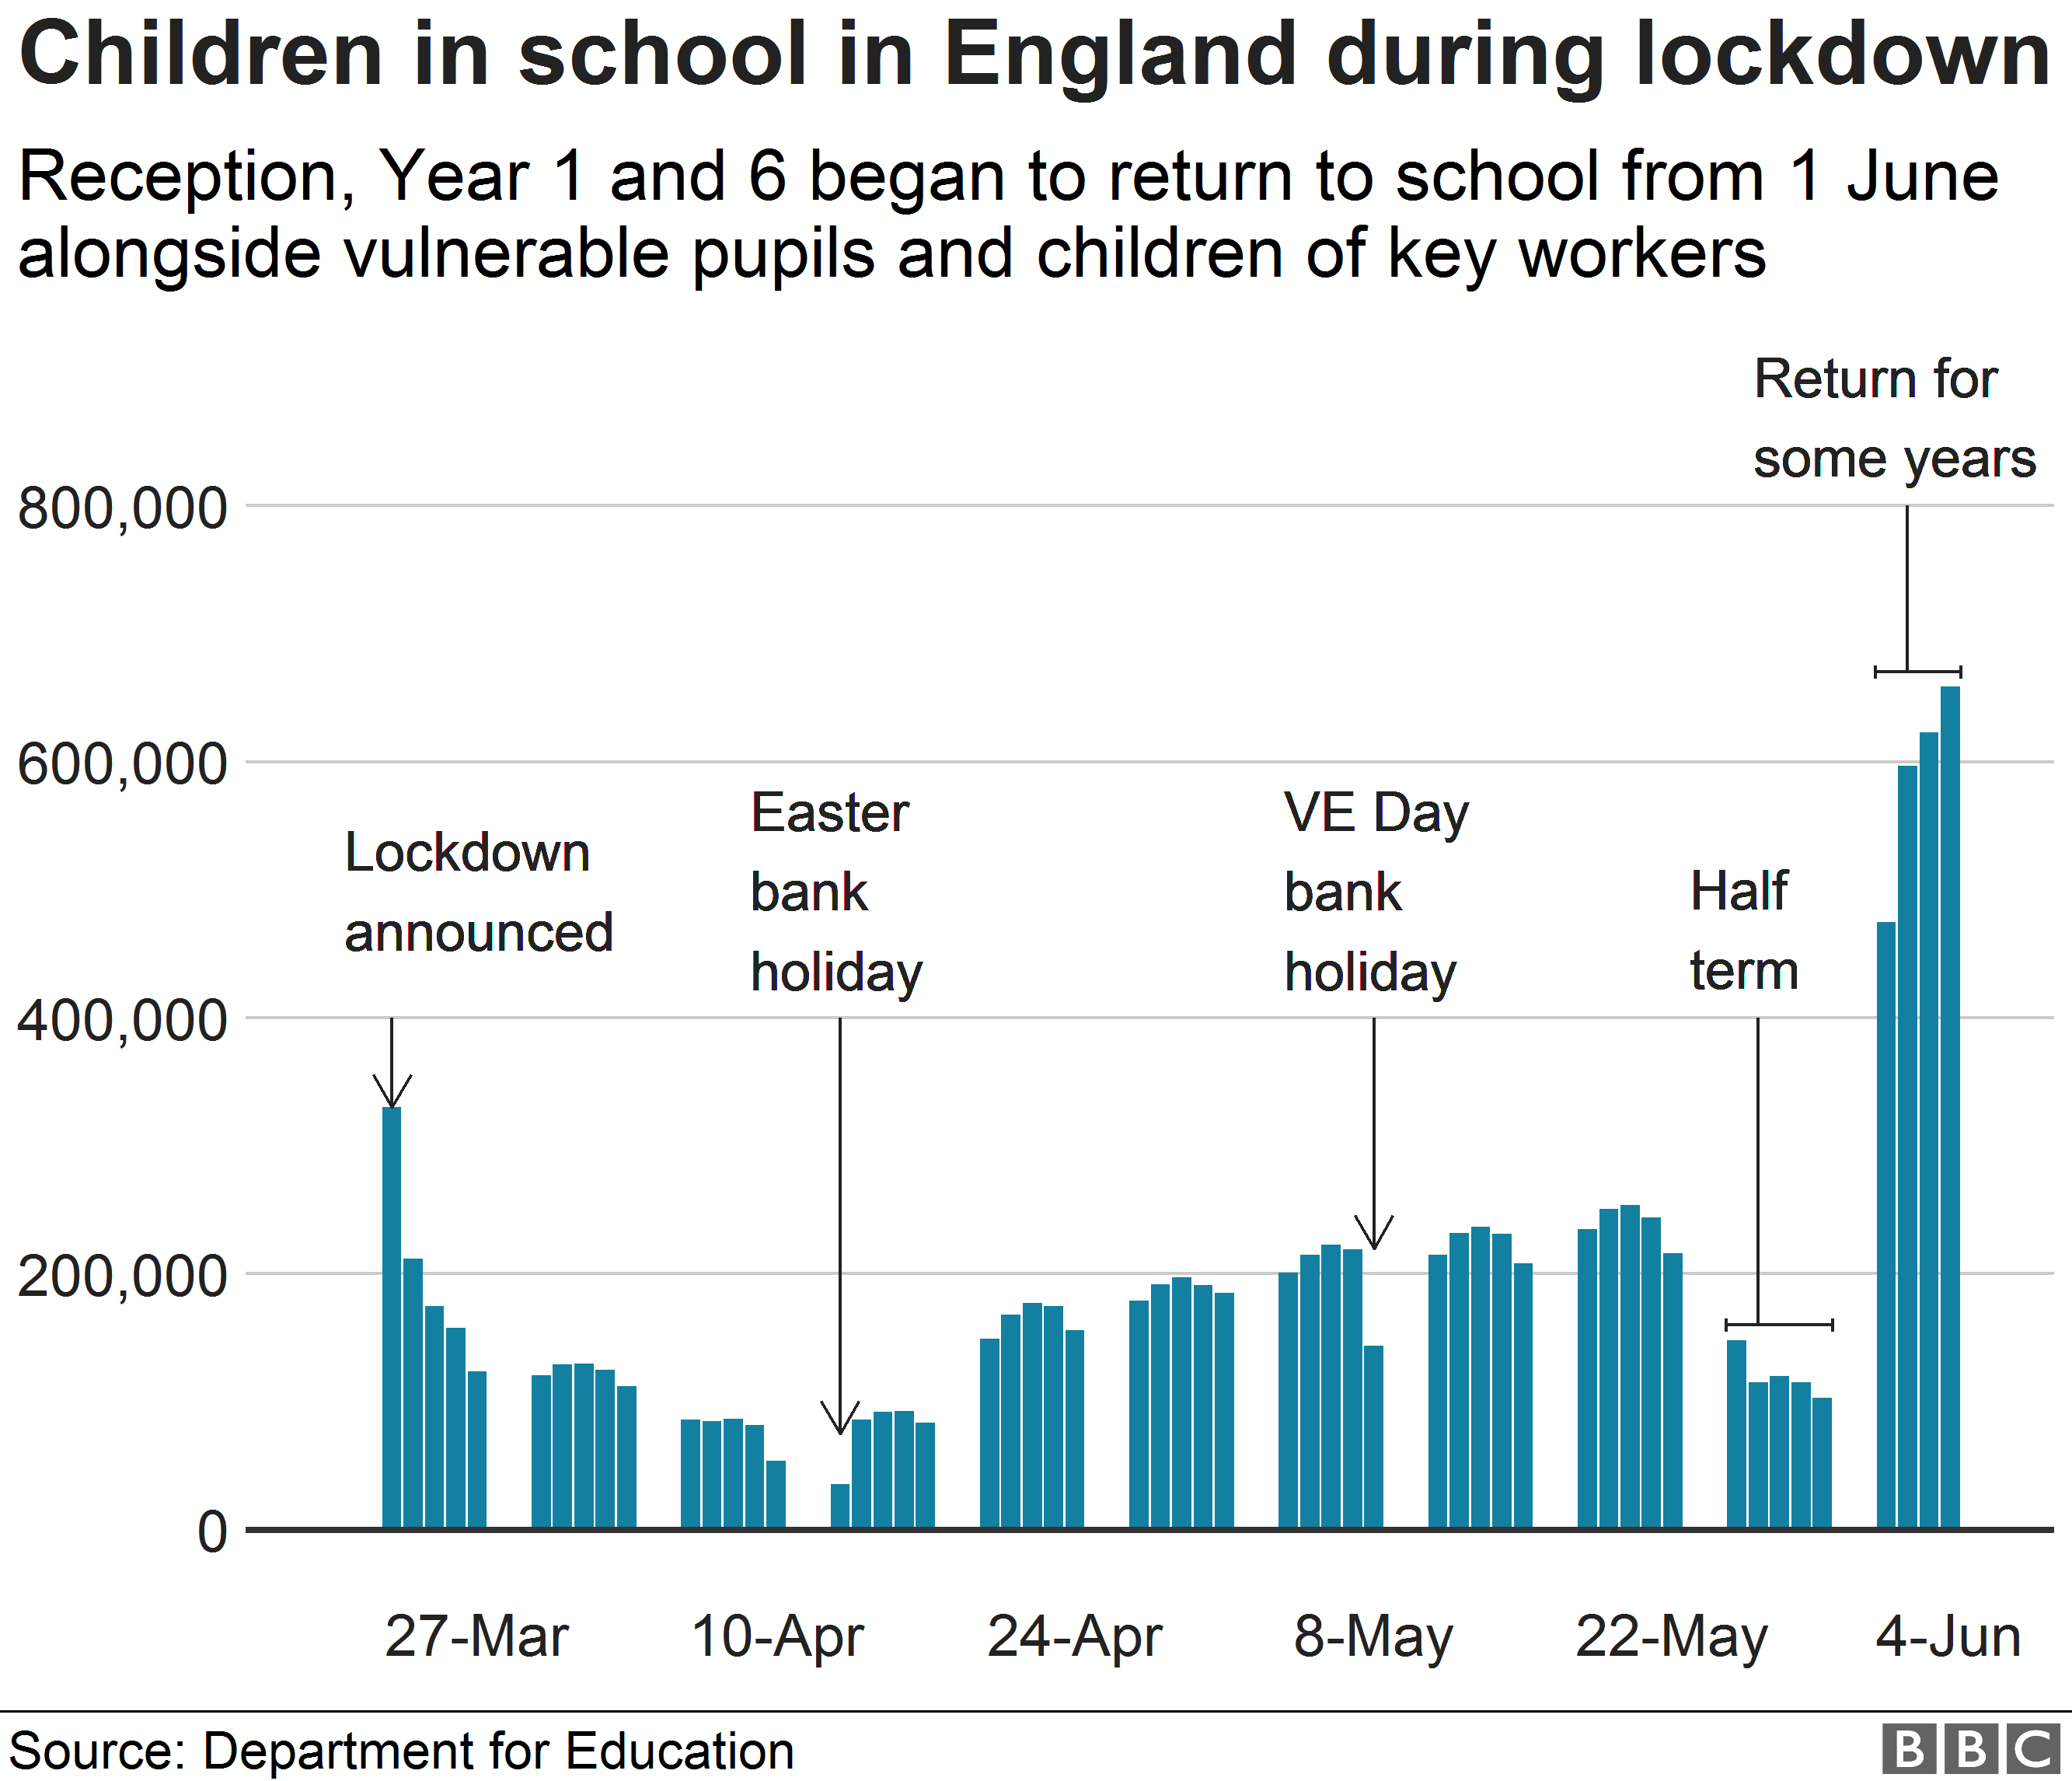 Chart showing numbers of children in school during lockdown